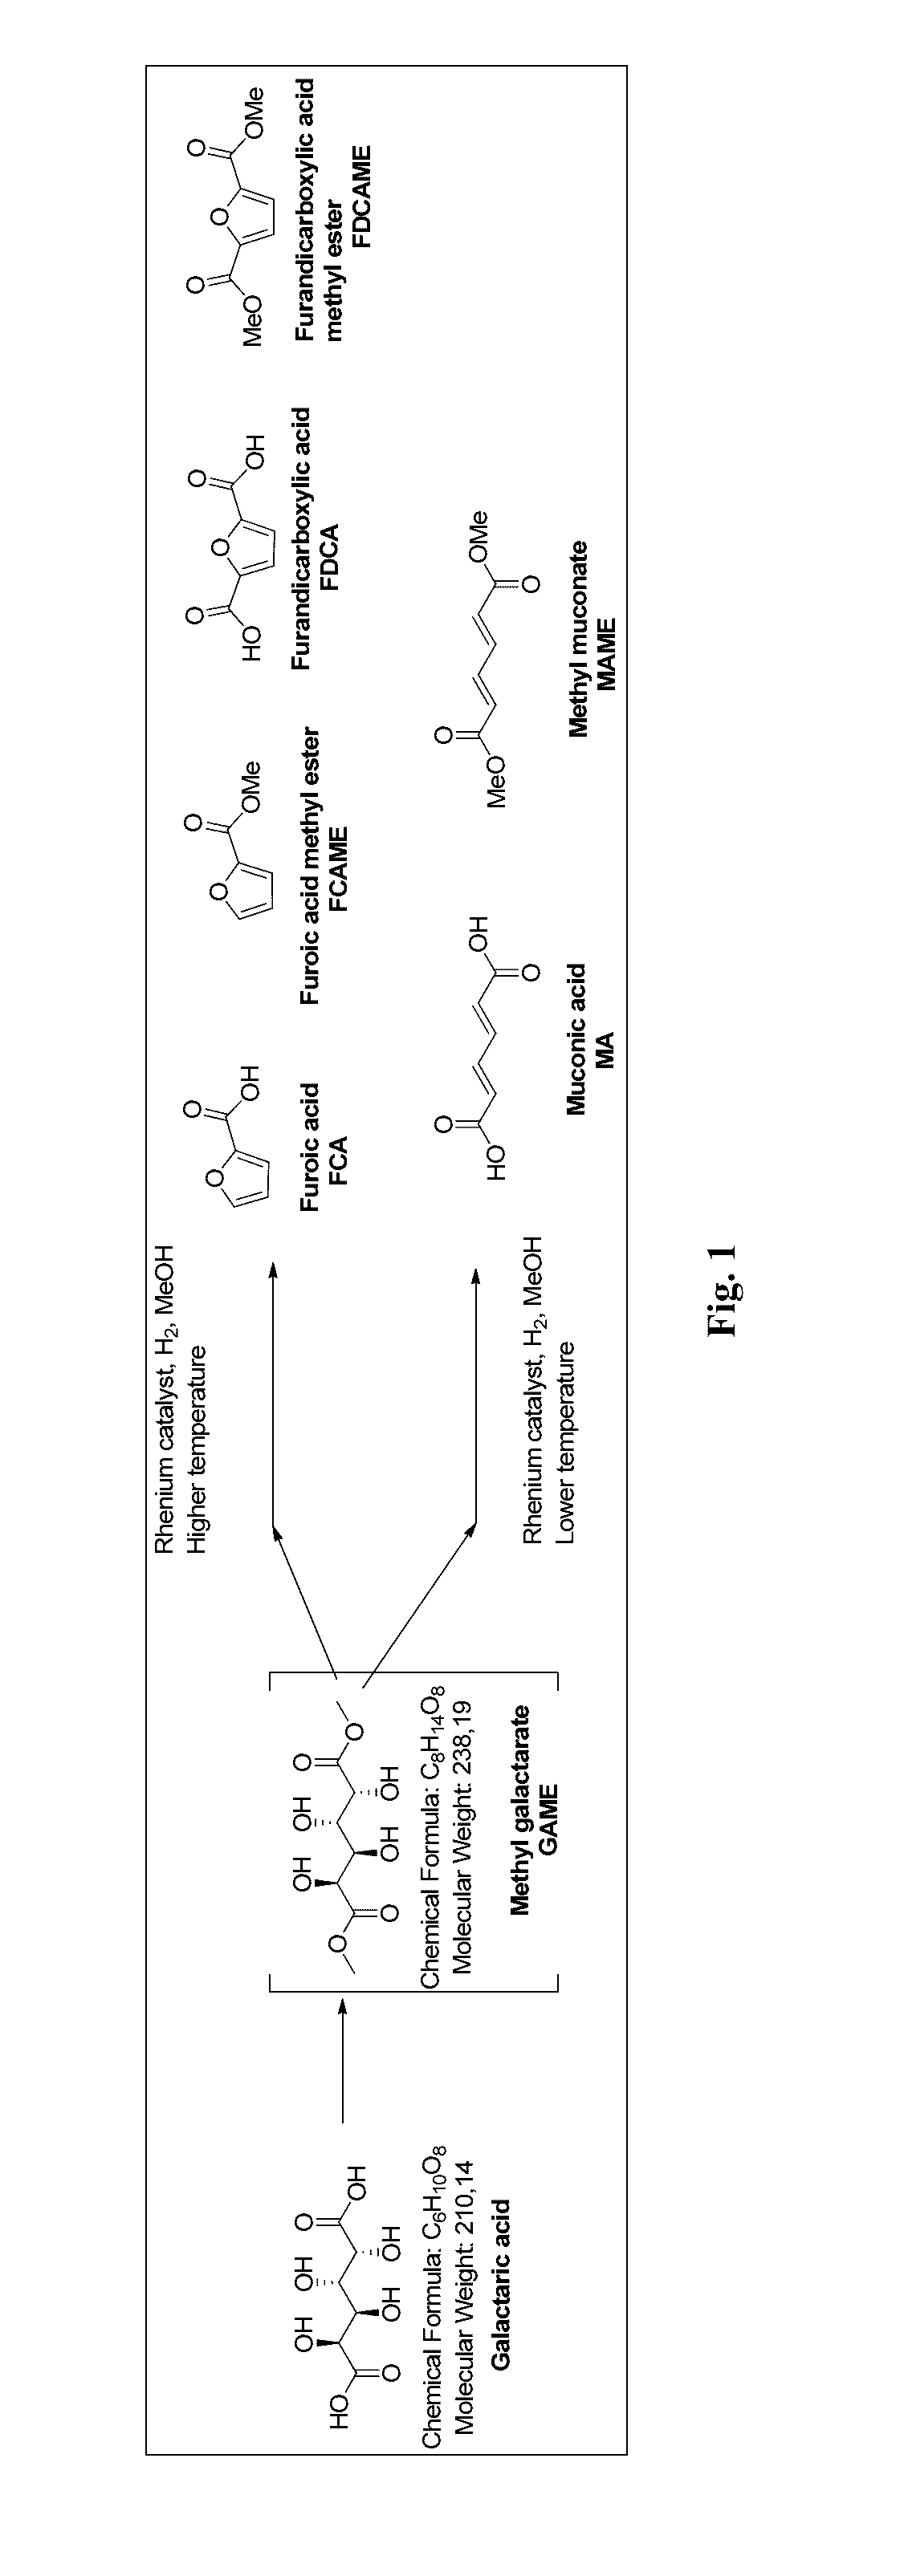 Method for producing muconic acids and furans from aldaric acids